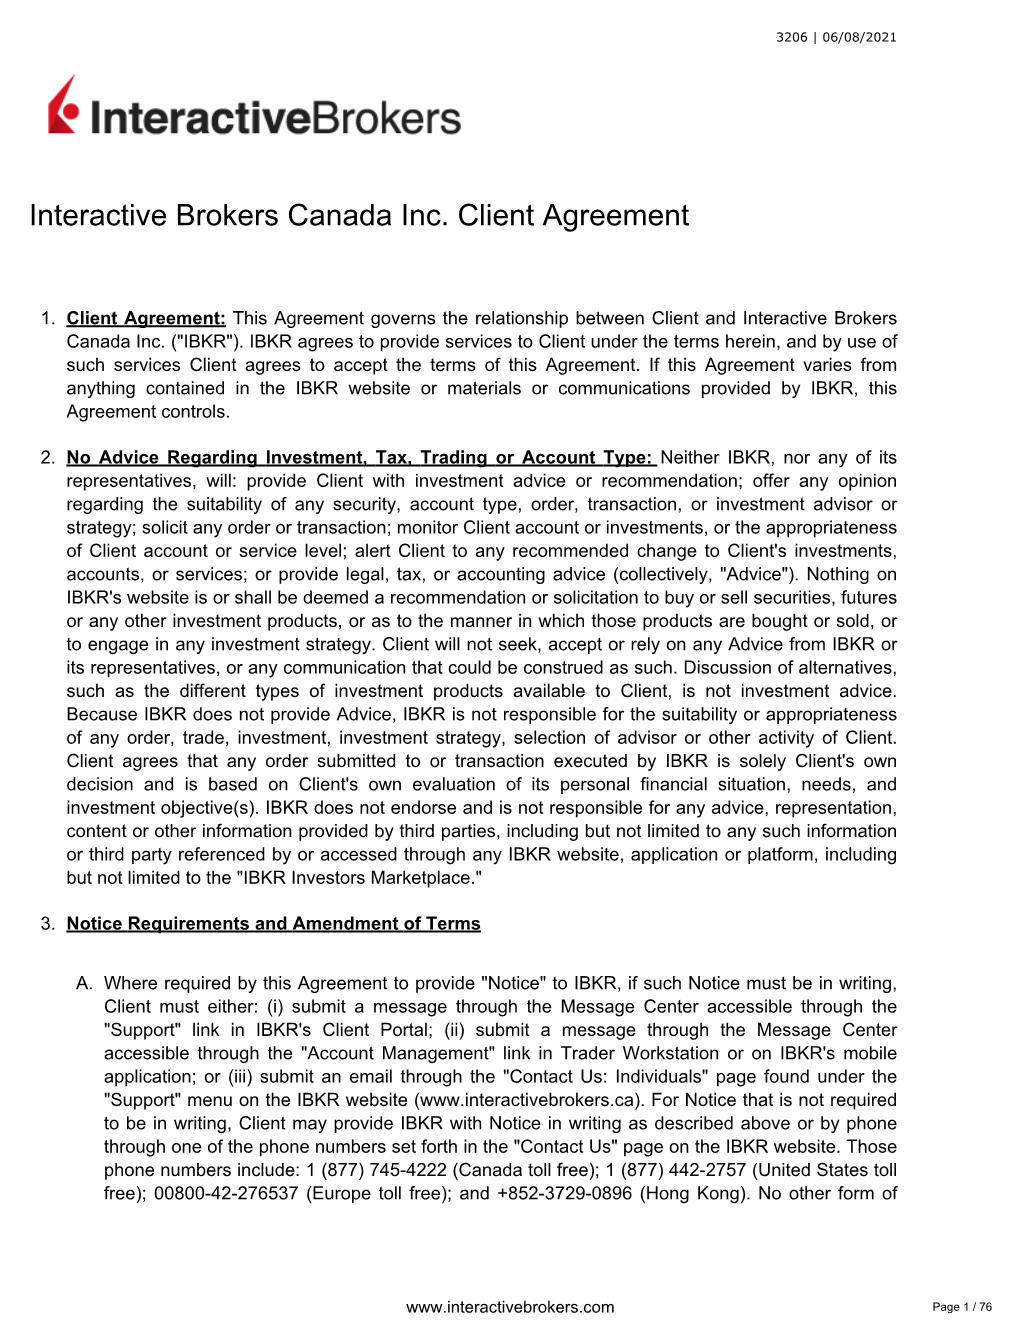 Interactive Brokers Canada Inc. Client Agreement